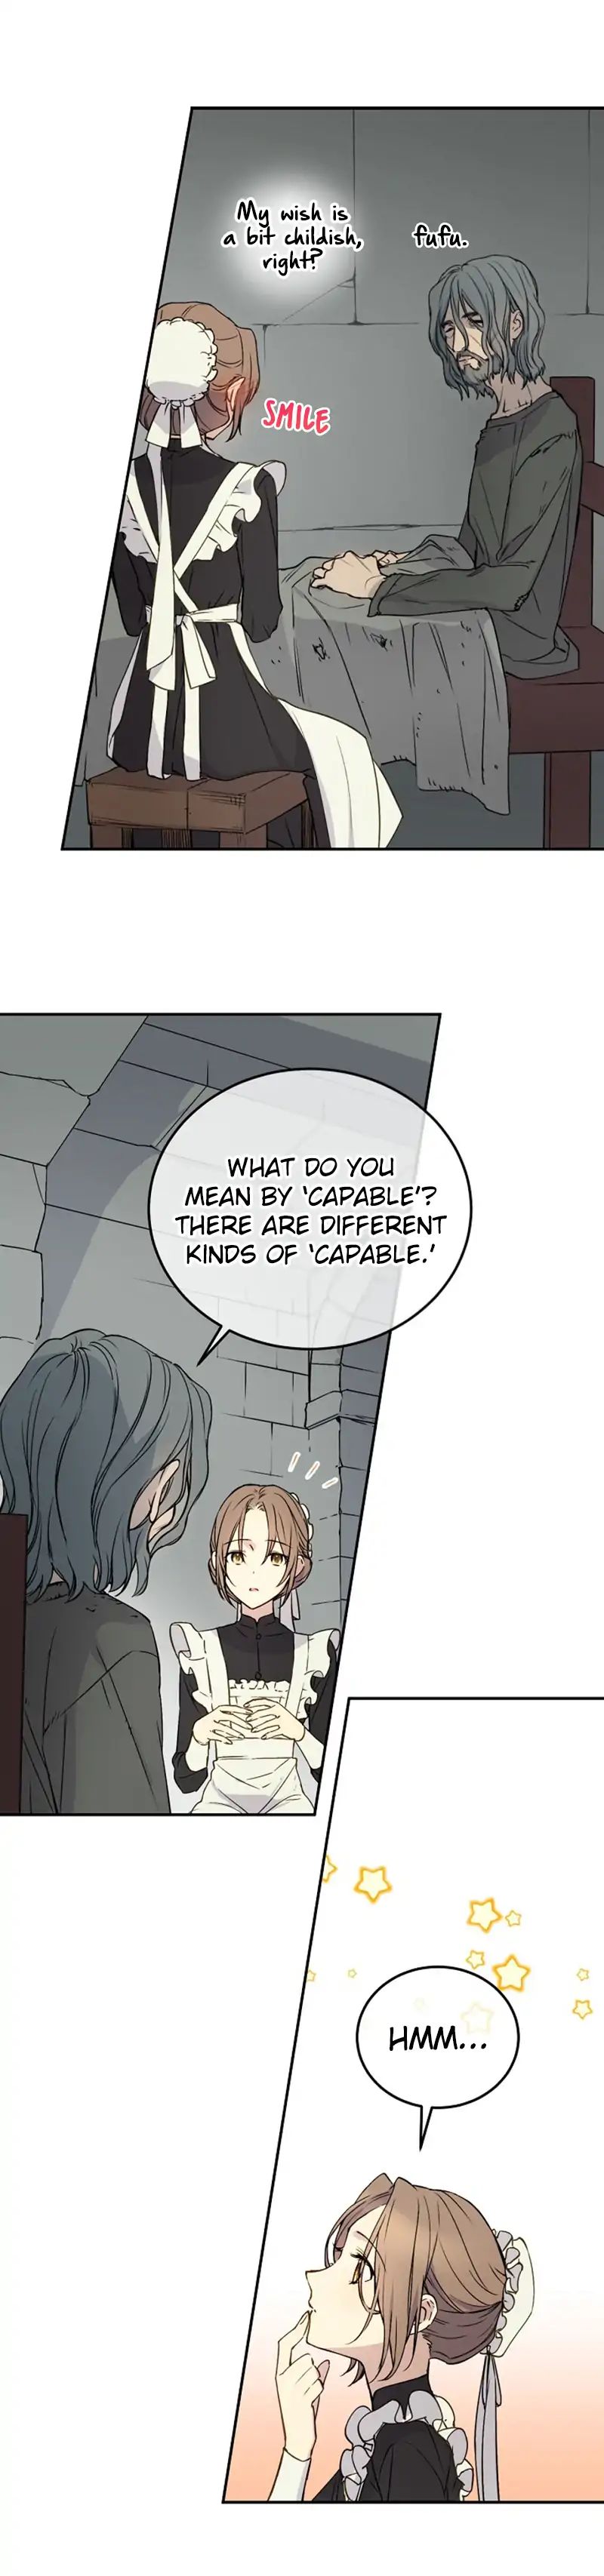 A Capable Maid chapter 1